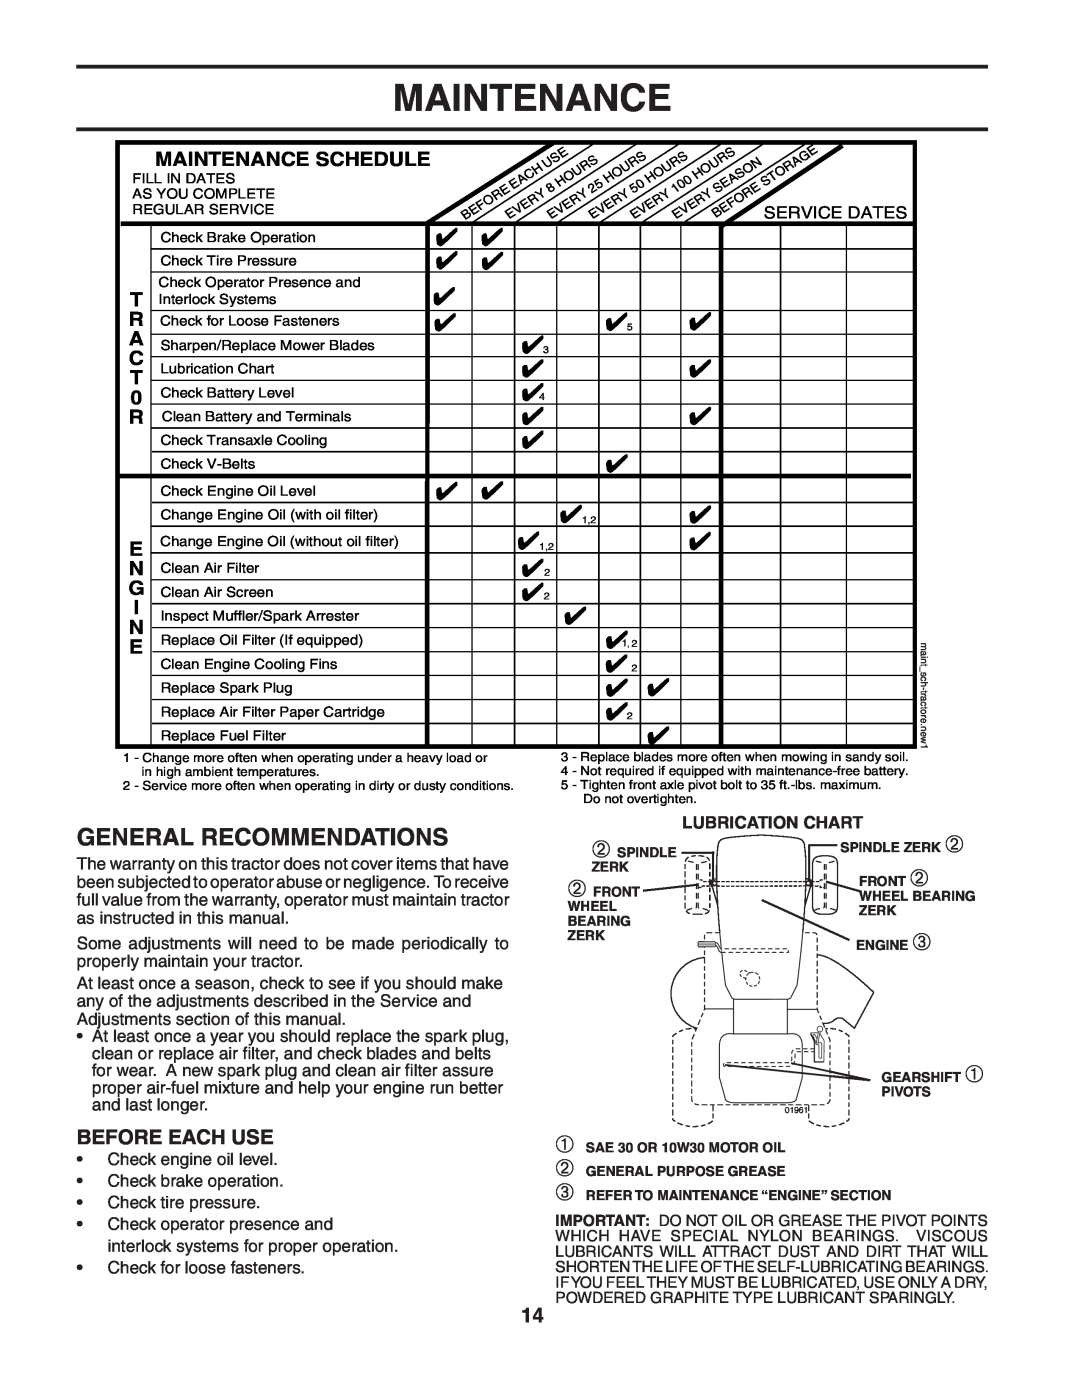 McCulloch MC1136B manual General Recommendations, Before Each Use, Maintenance Schedule 